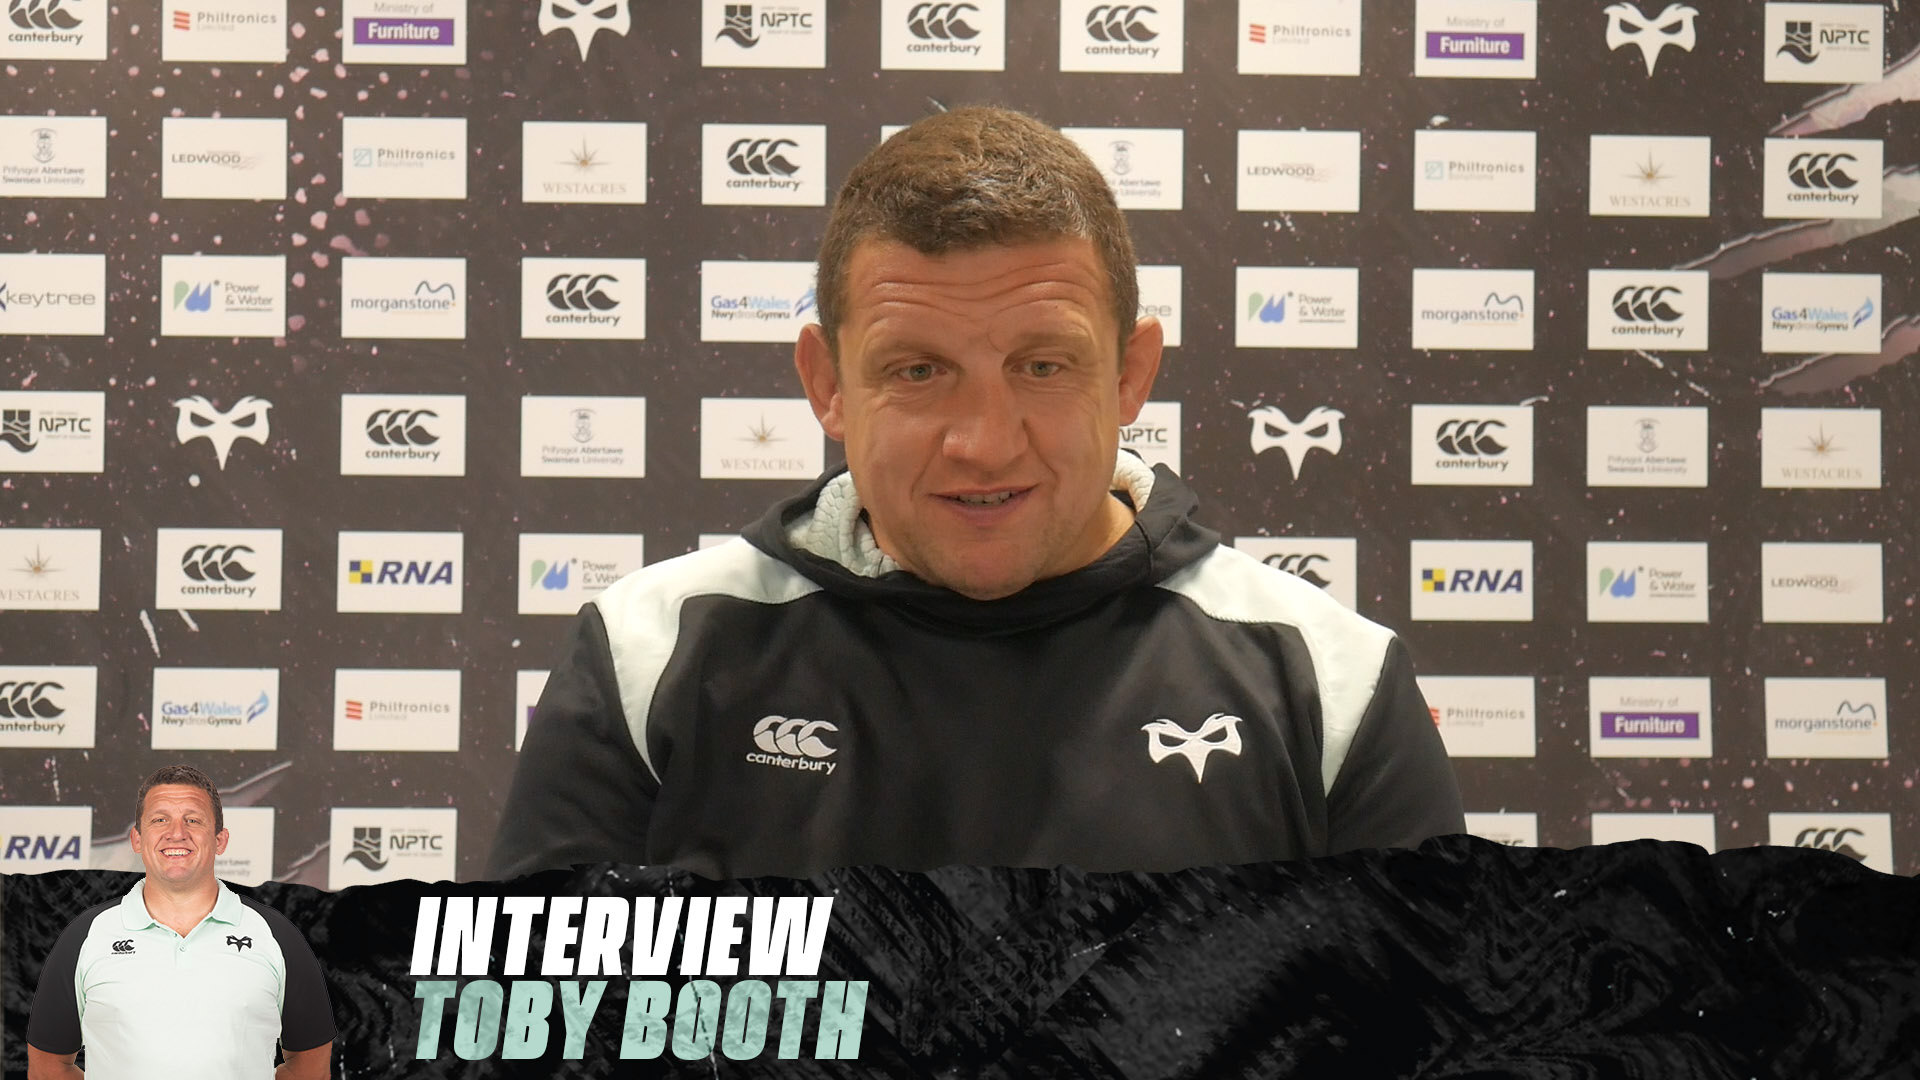 INTERVIEW: Toby Booth (11th November 2020)